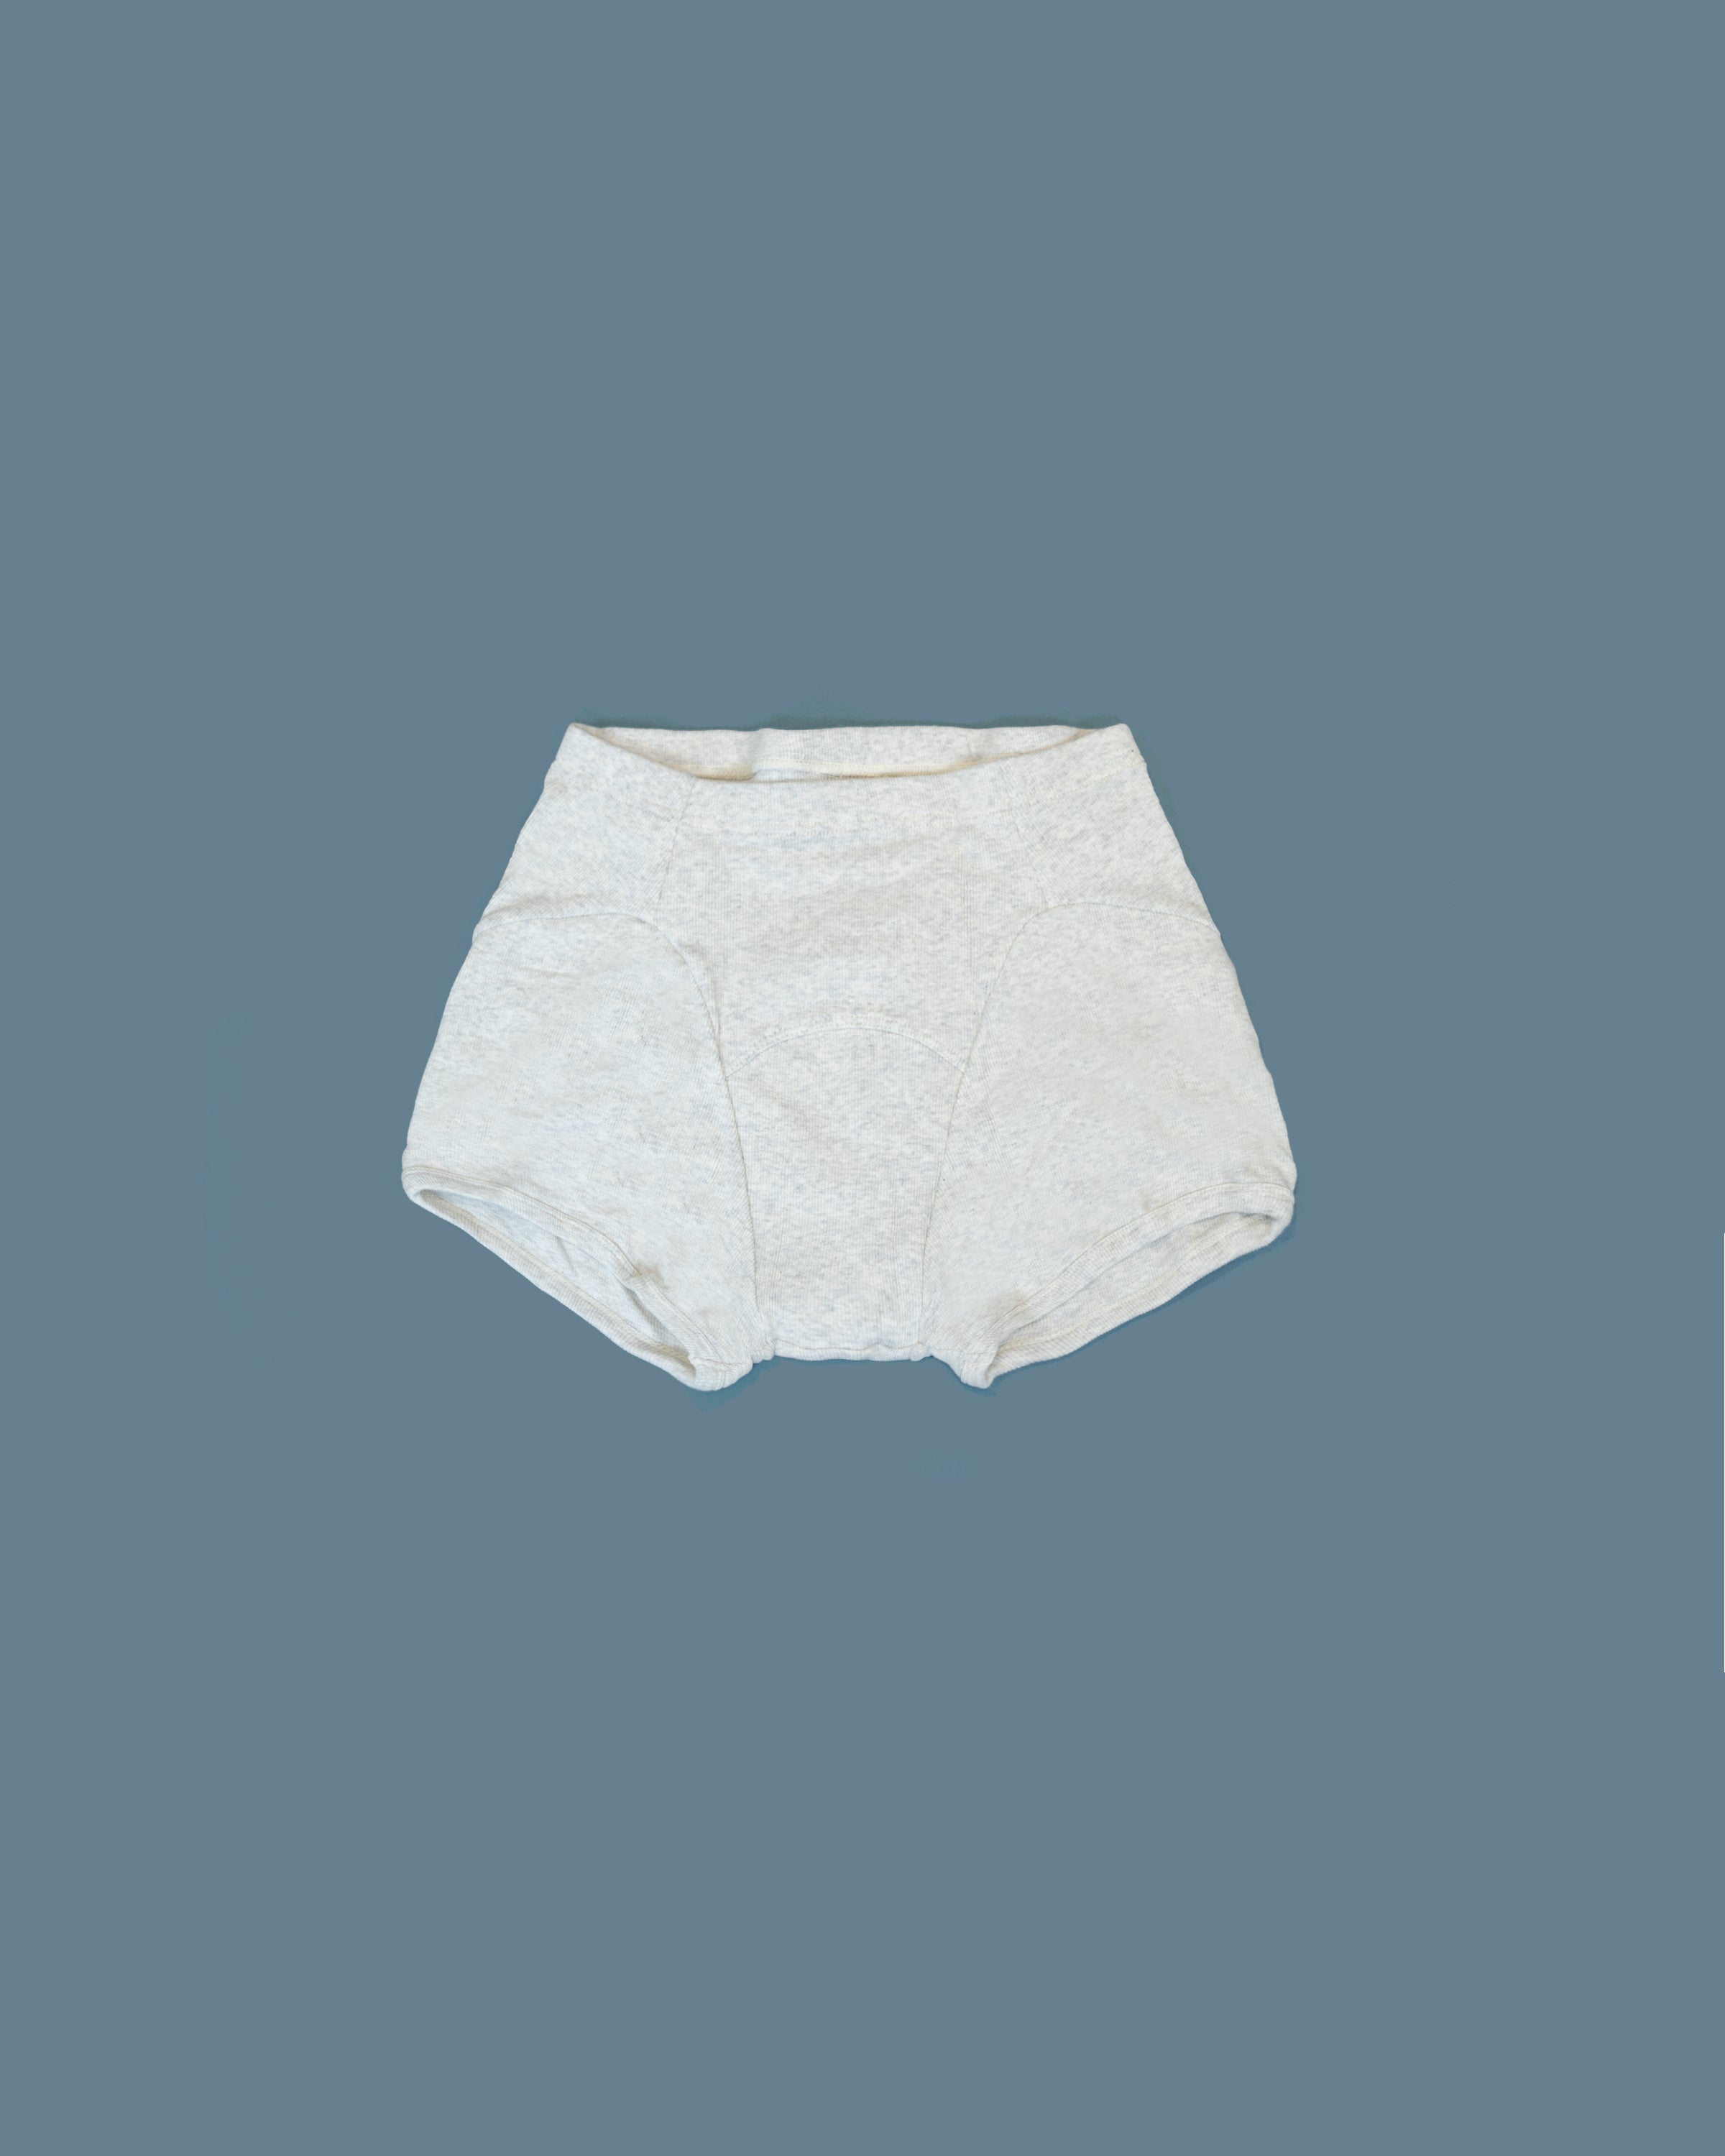 REAL McCOY'S ATHLETIC UNDERWEAR SHORT – The Real McCoy's